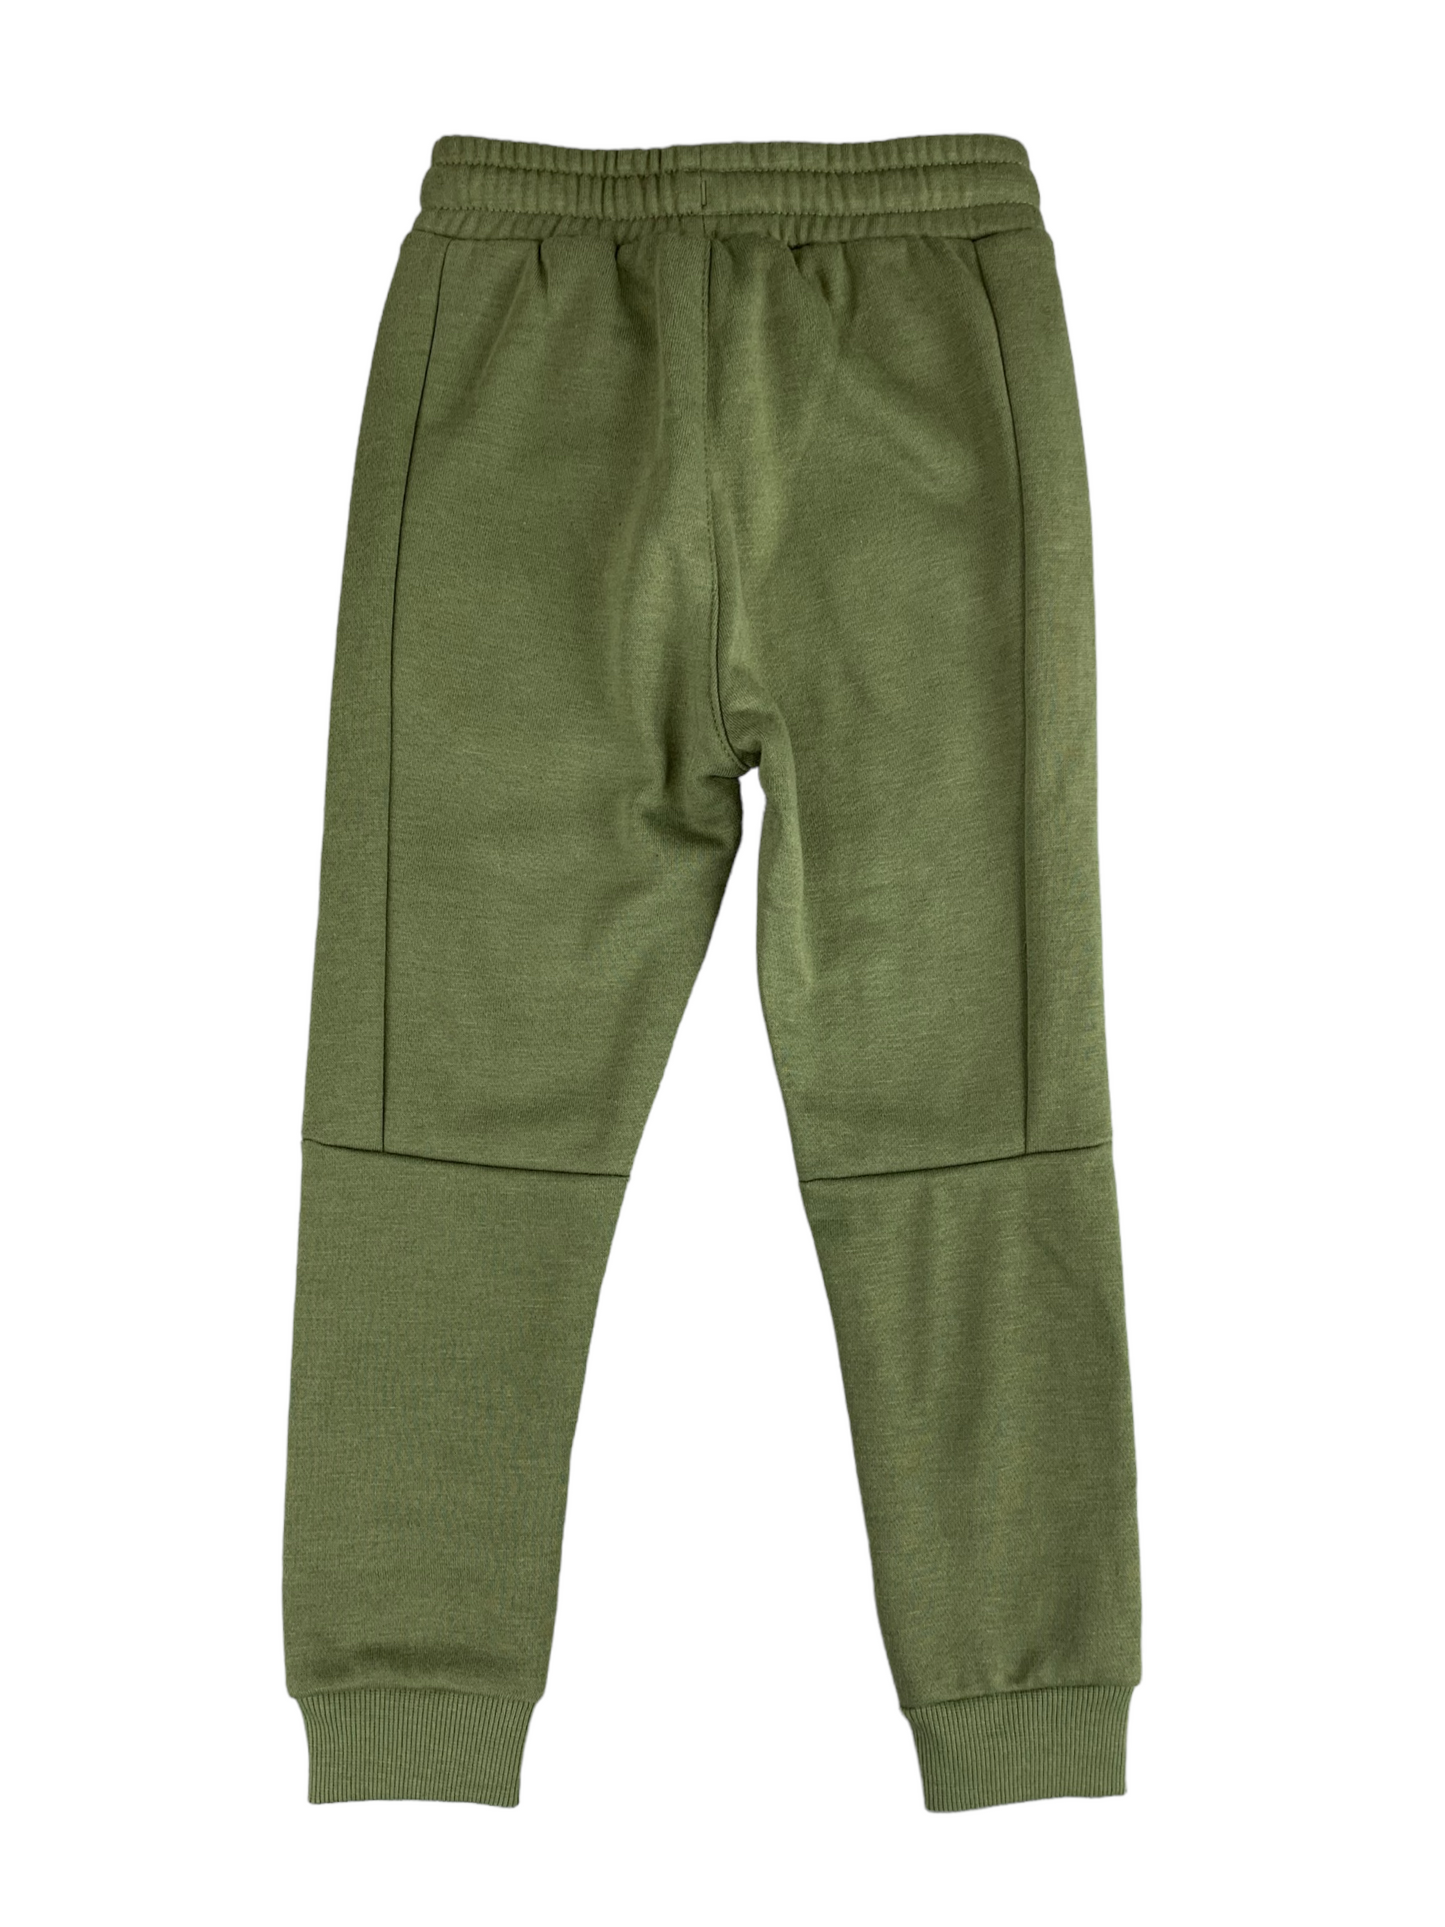 Khaki green joggers for boys 2 to 7 years